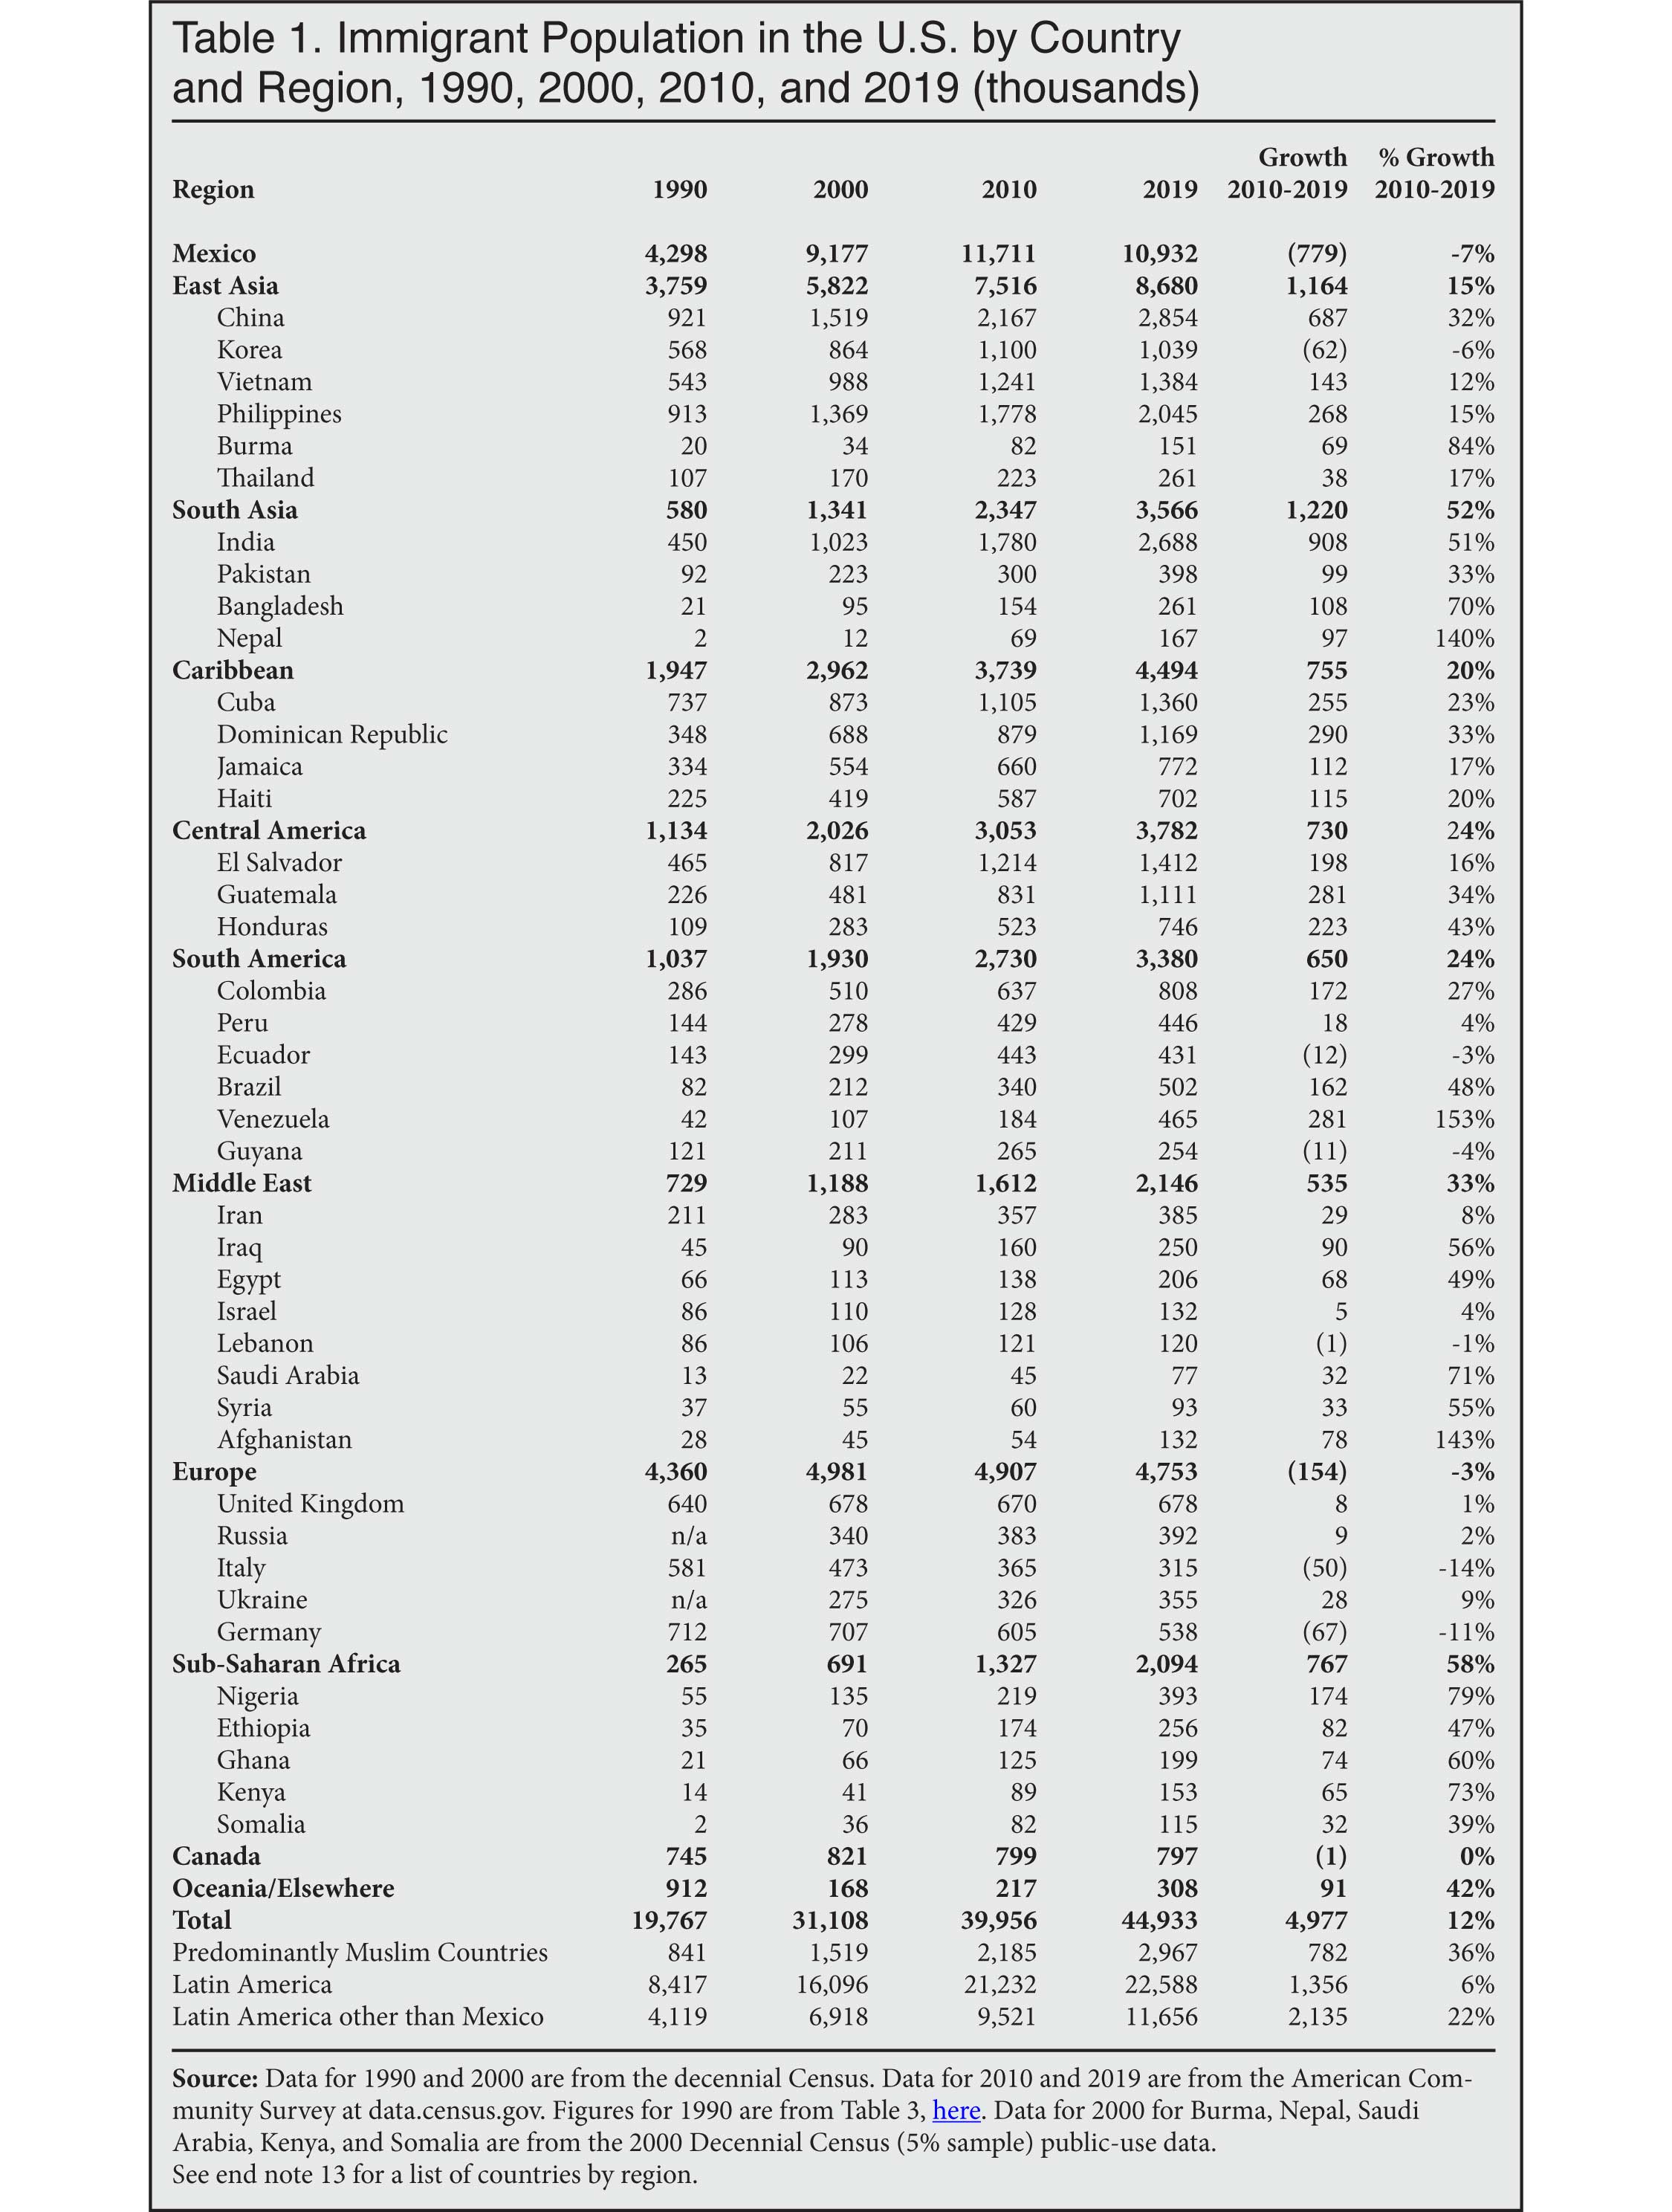 Table: Immigrant Population in the US by Country and Region, 1990, 2000, 2010, 2019